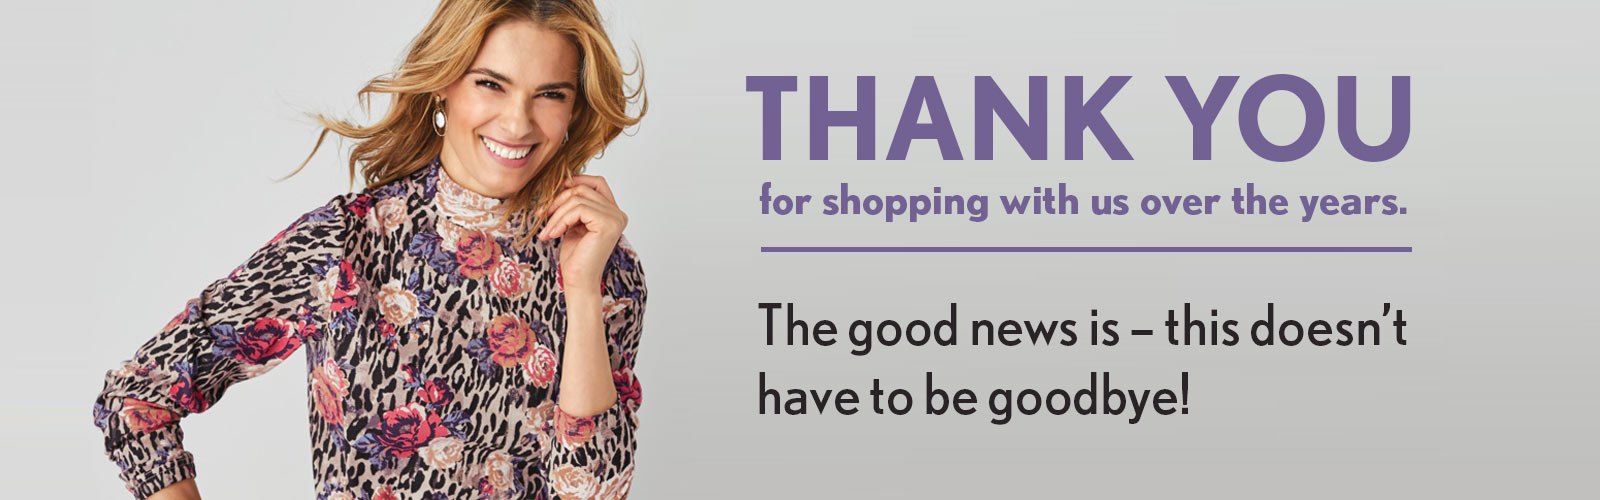 Thank you for shopping with us over the years. The good news is - this doesn't have to be goodbye!